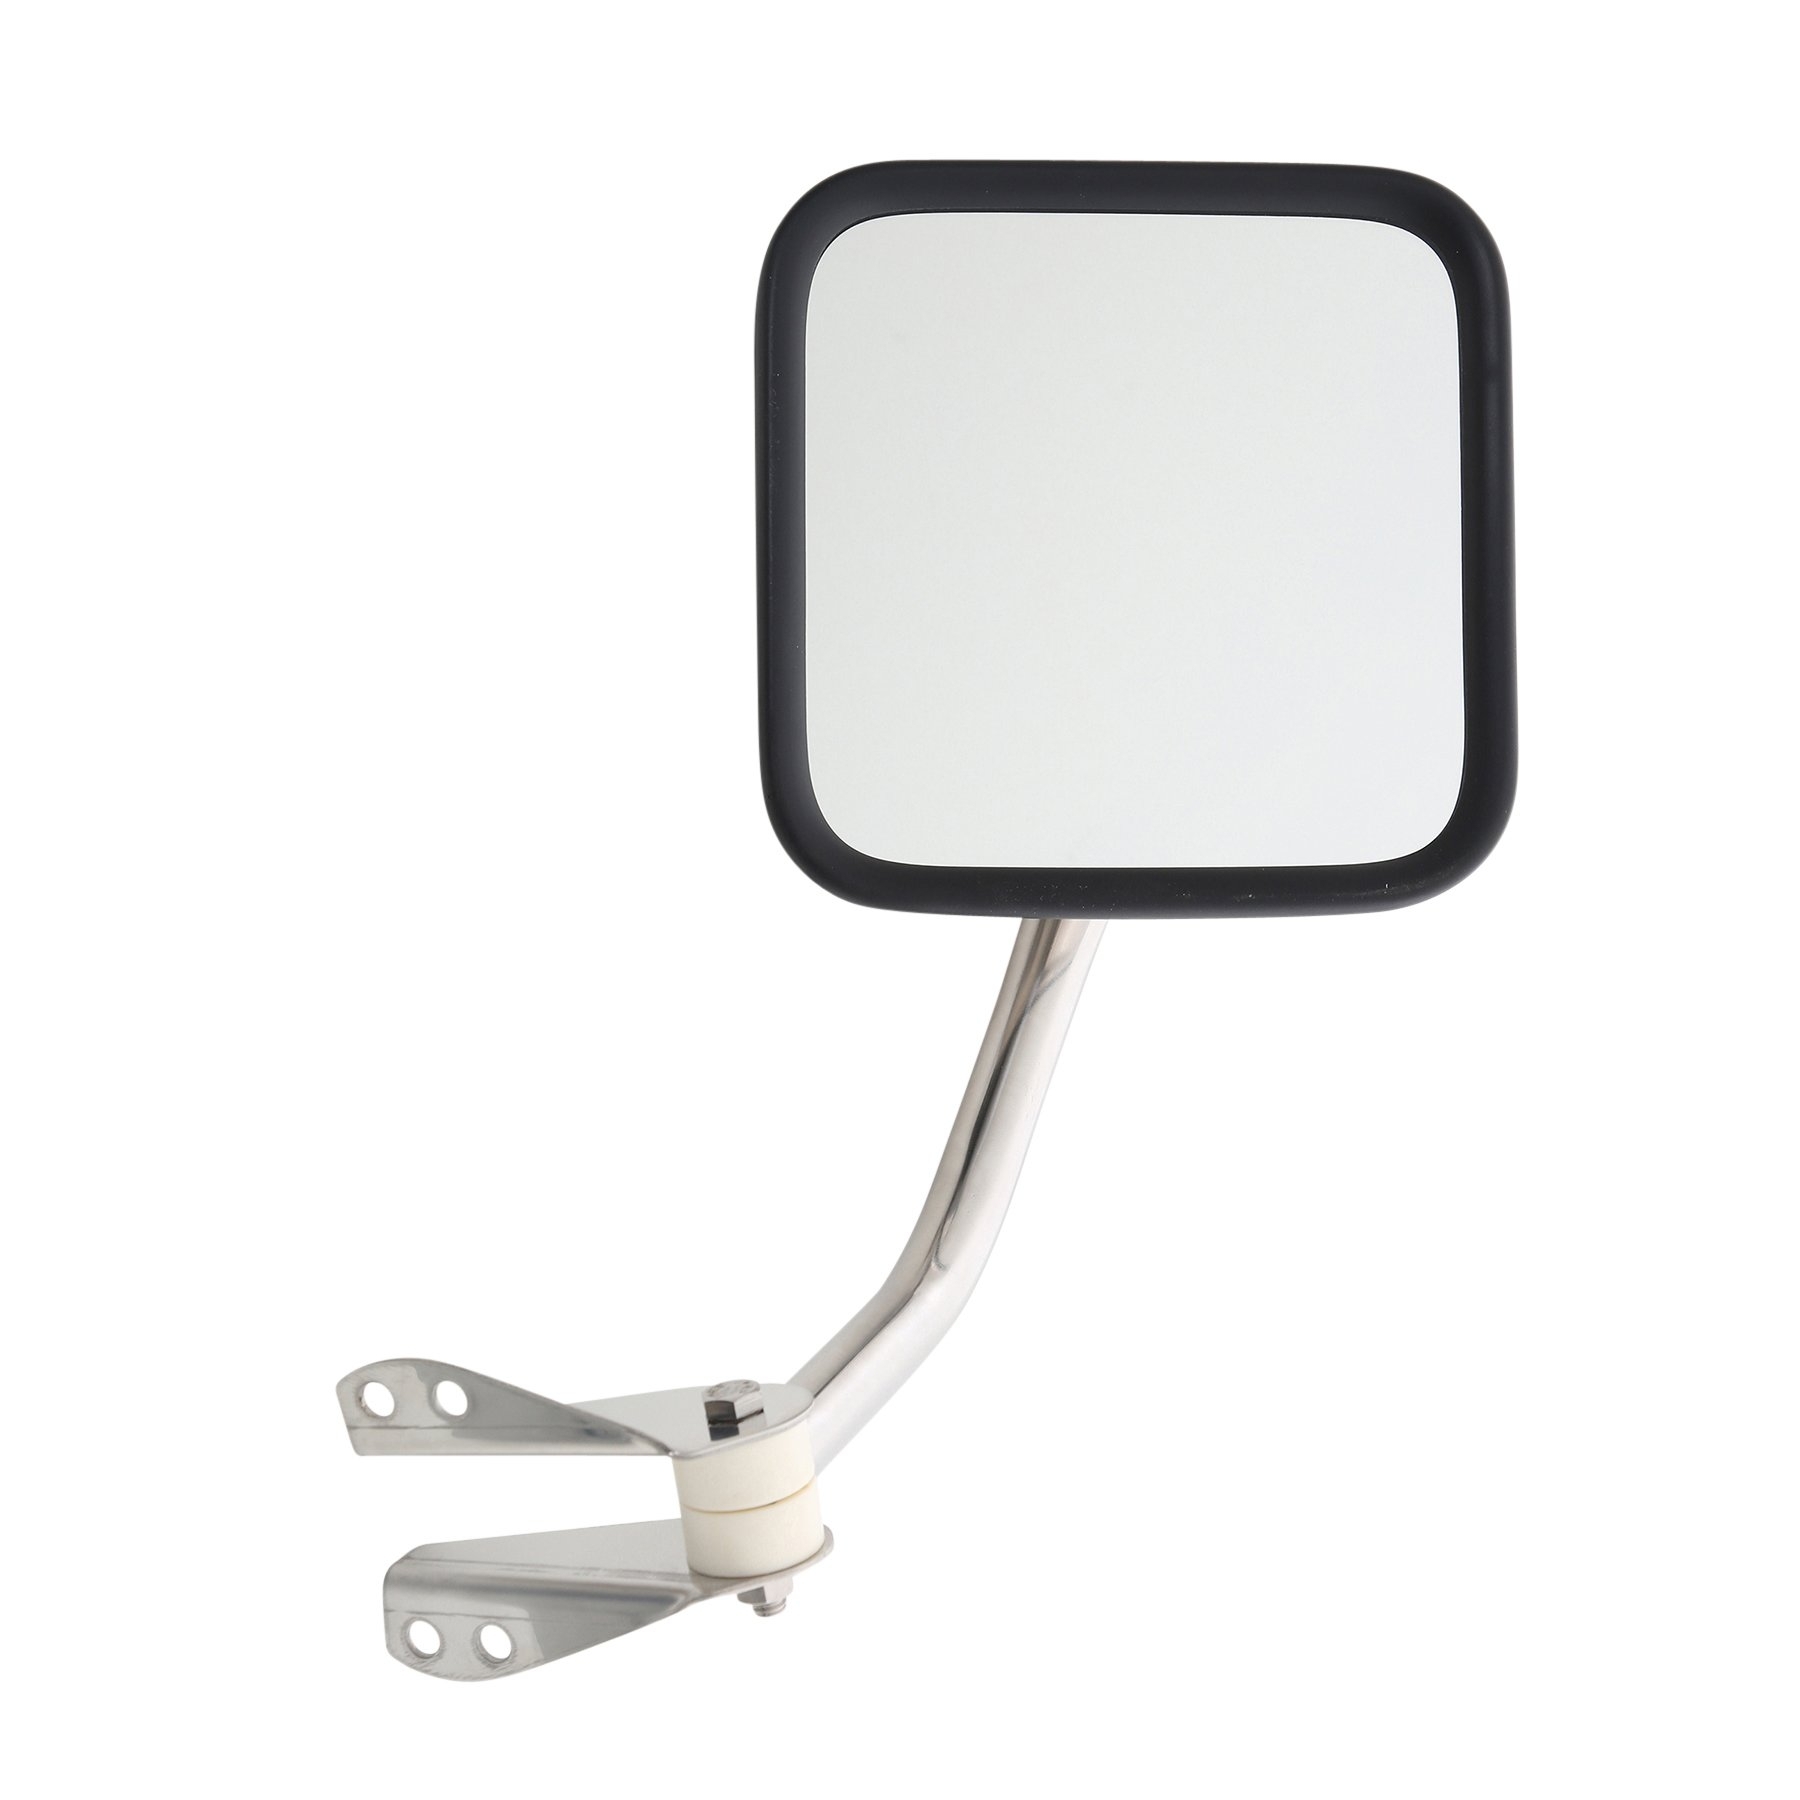 Smittybilt Side Mirrors for 1987-1995 Jeep Wrangler YJ - Stainless Steel |  Best Prices & Reviews at Morris 4x4